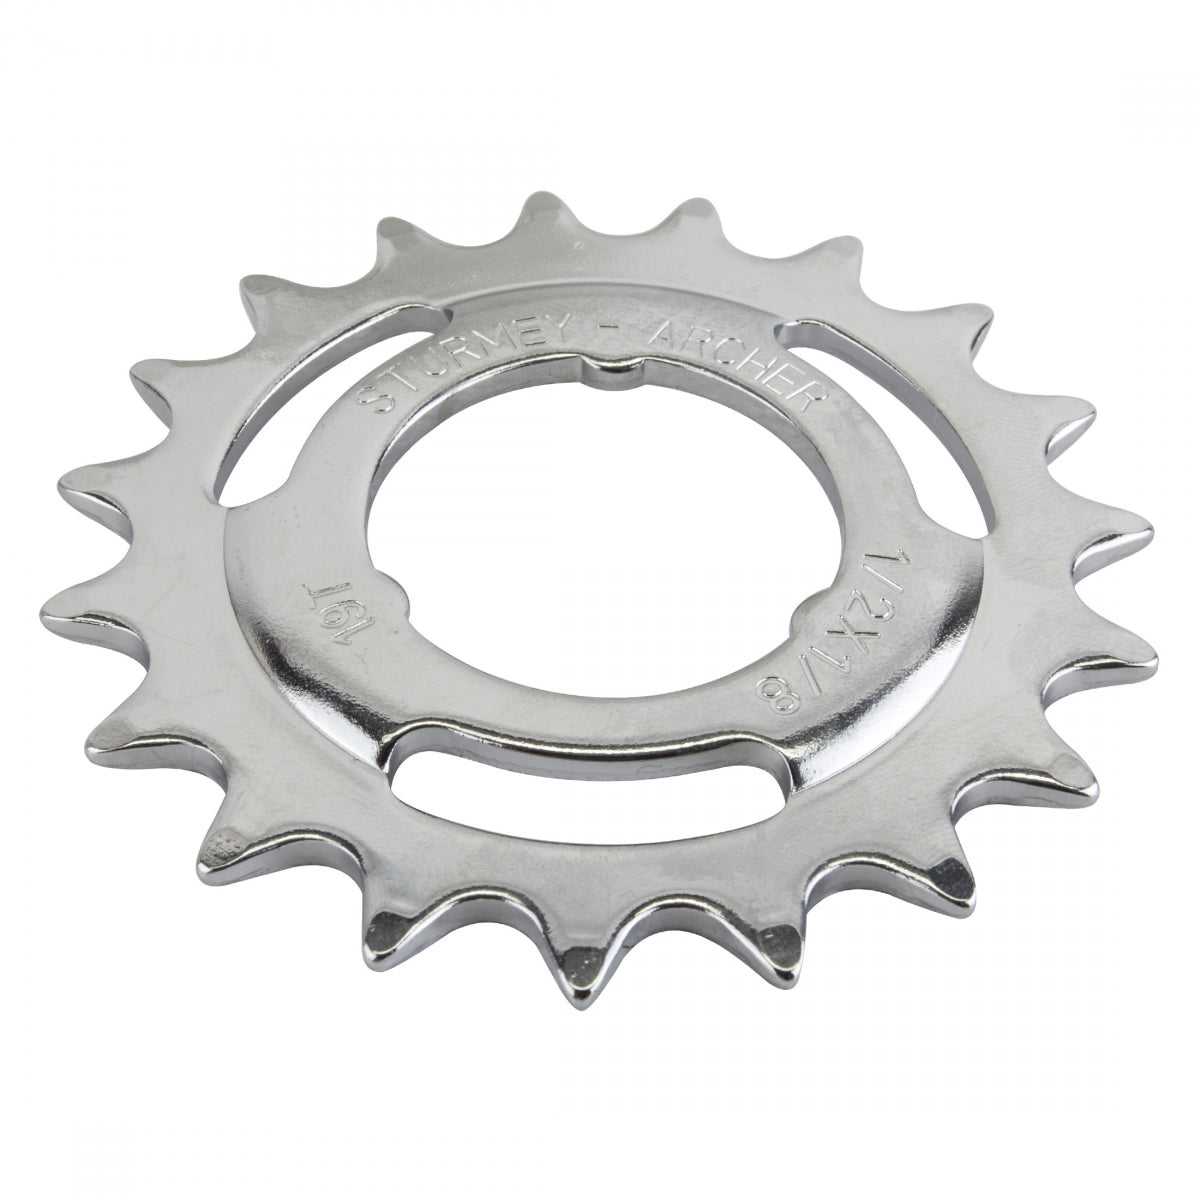 Hub Part S/A Hsl-836 Sprocket Dished 19T 1/8 Chrome Plated